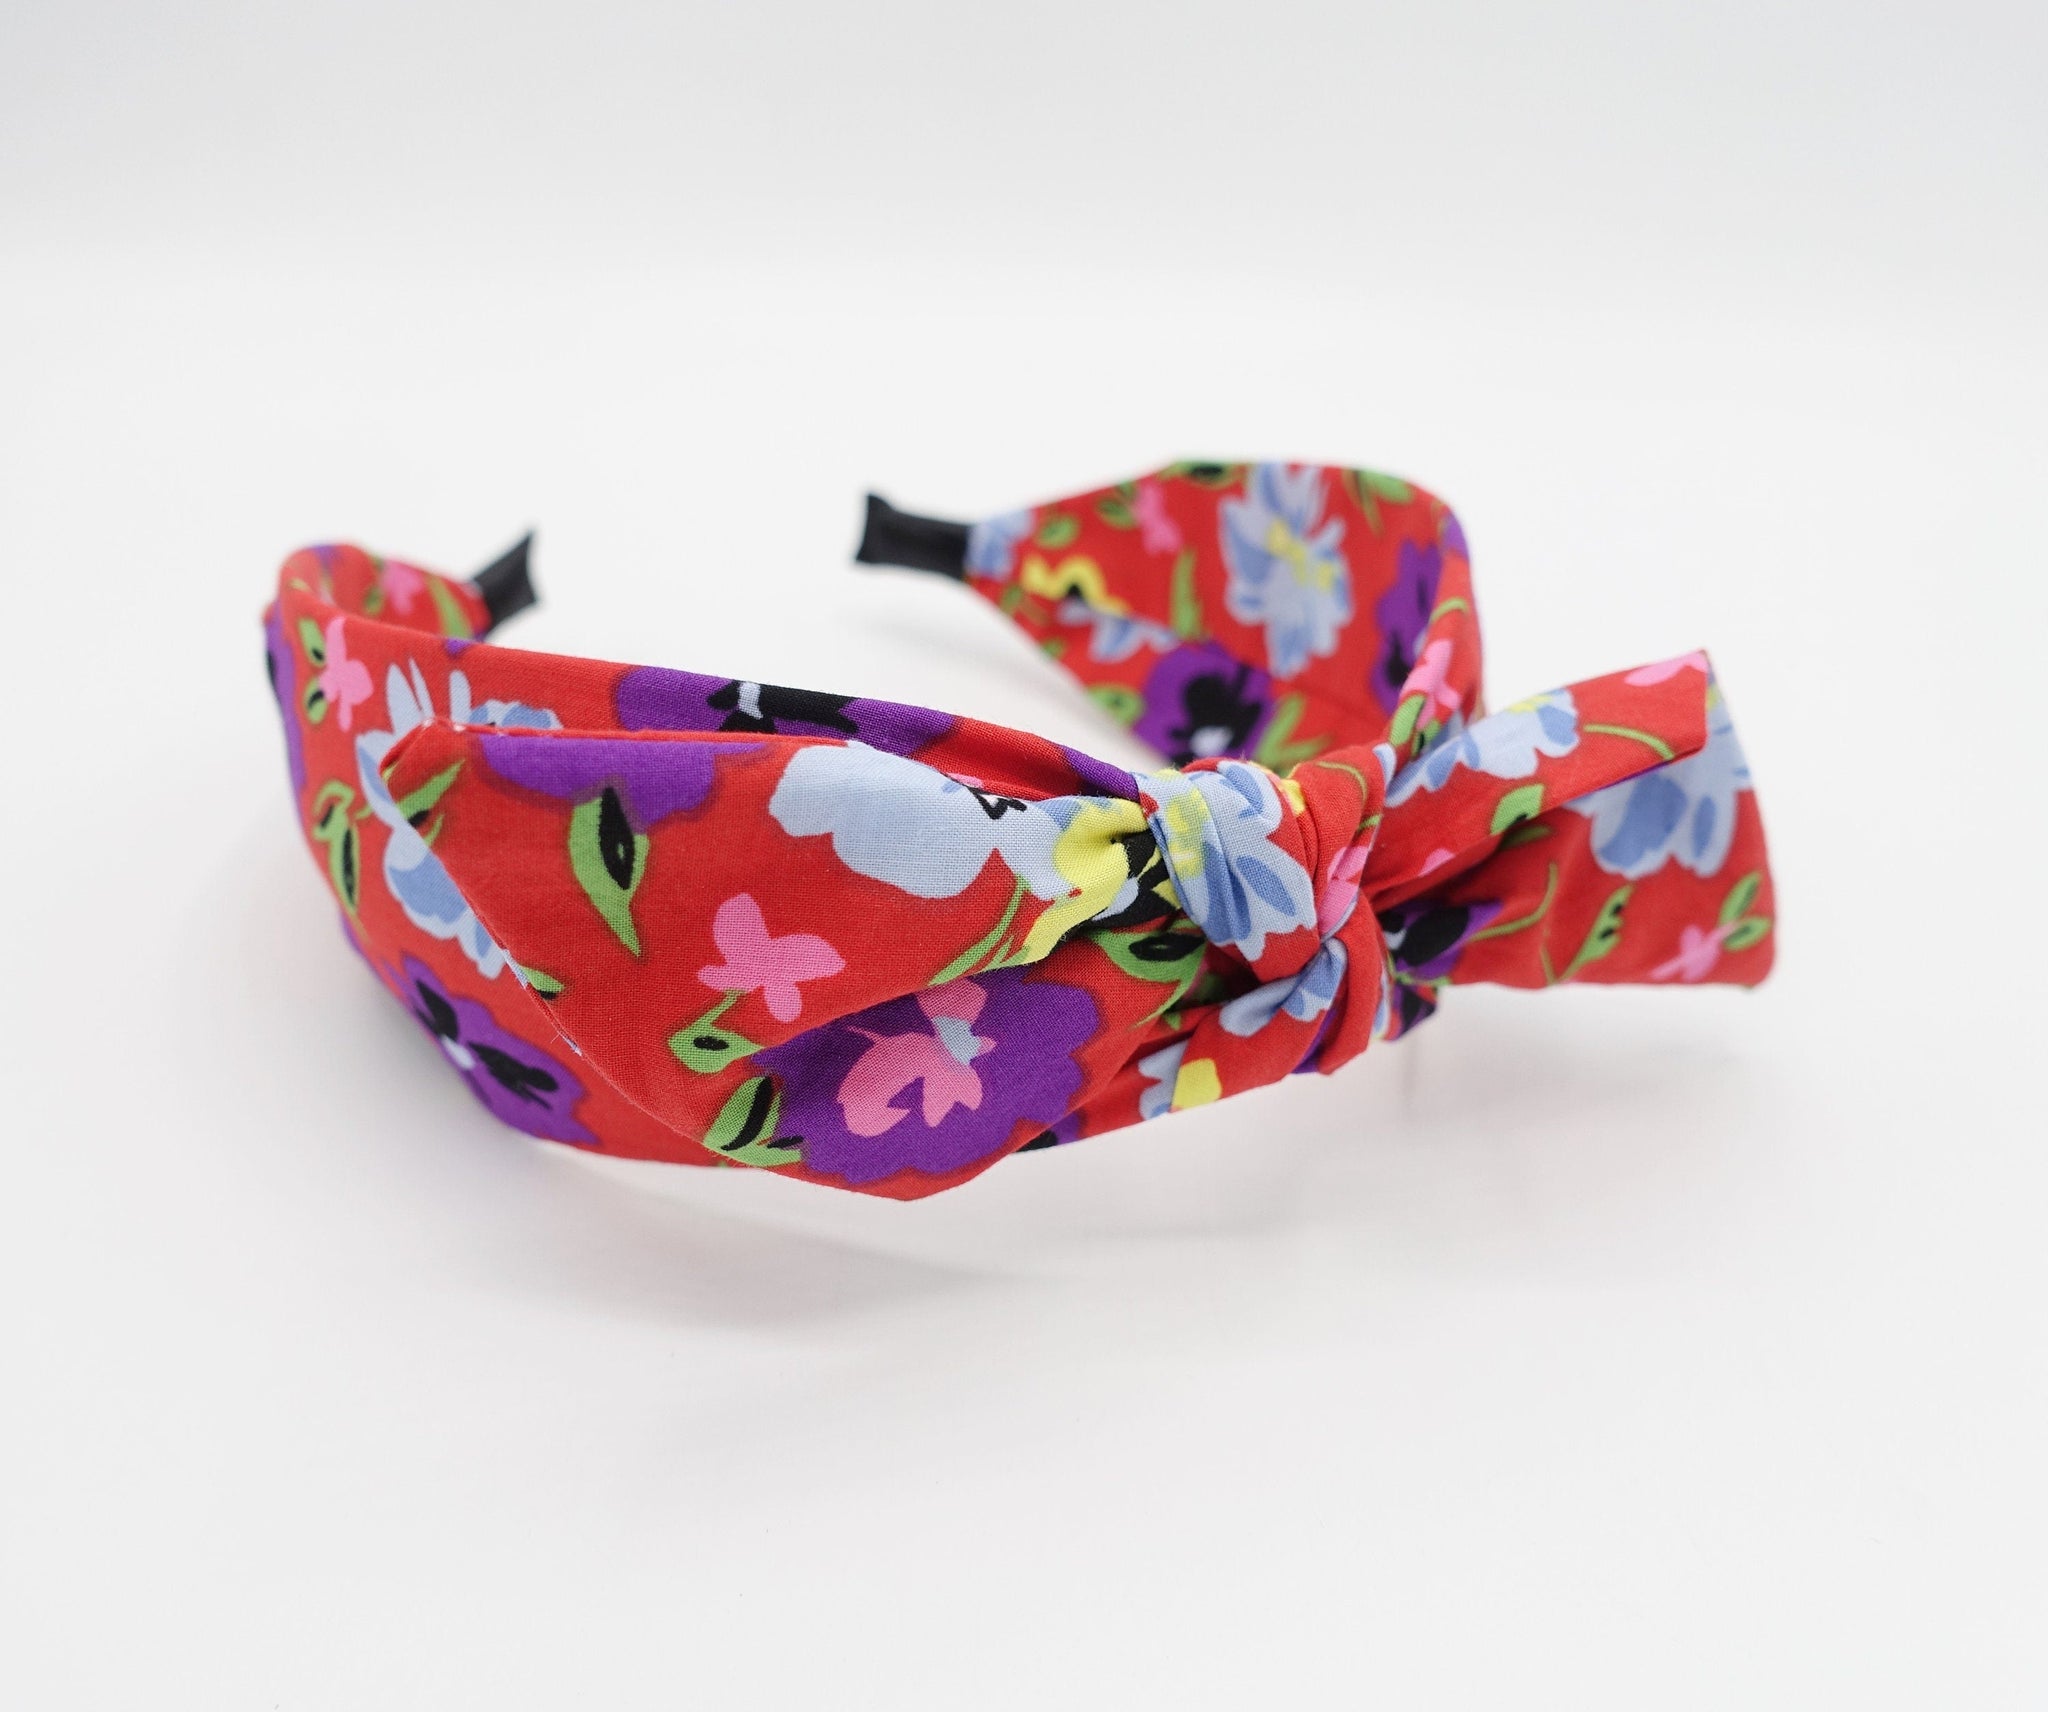 veryshine.com Headband Red vivid Spring headband floral print wired bow hairband casual hair accessory for women